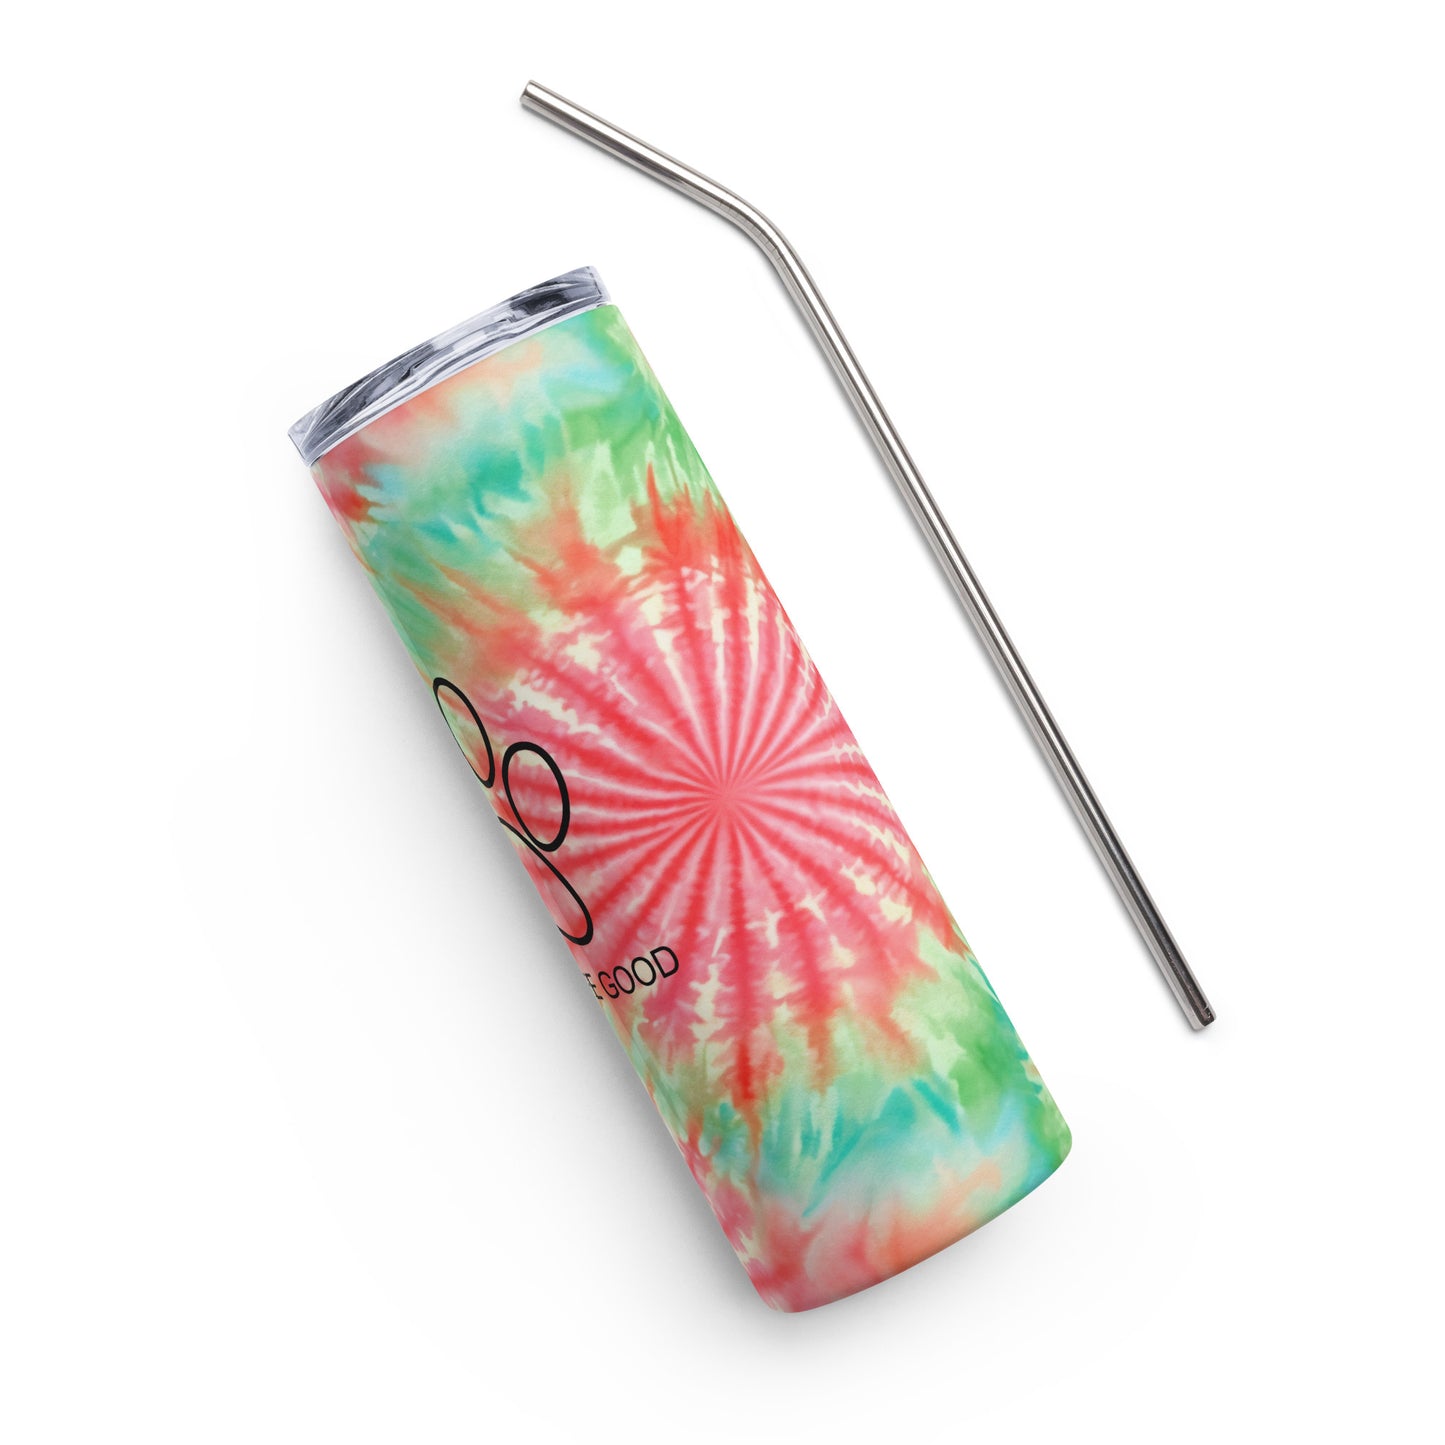 Watermelon Candy Tie Dye Stainless Steel Full Print Tumbler